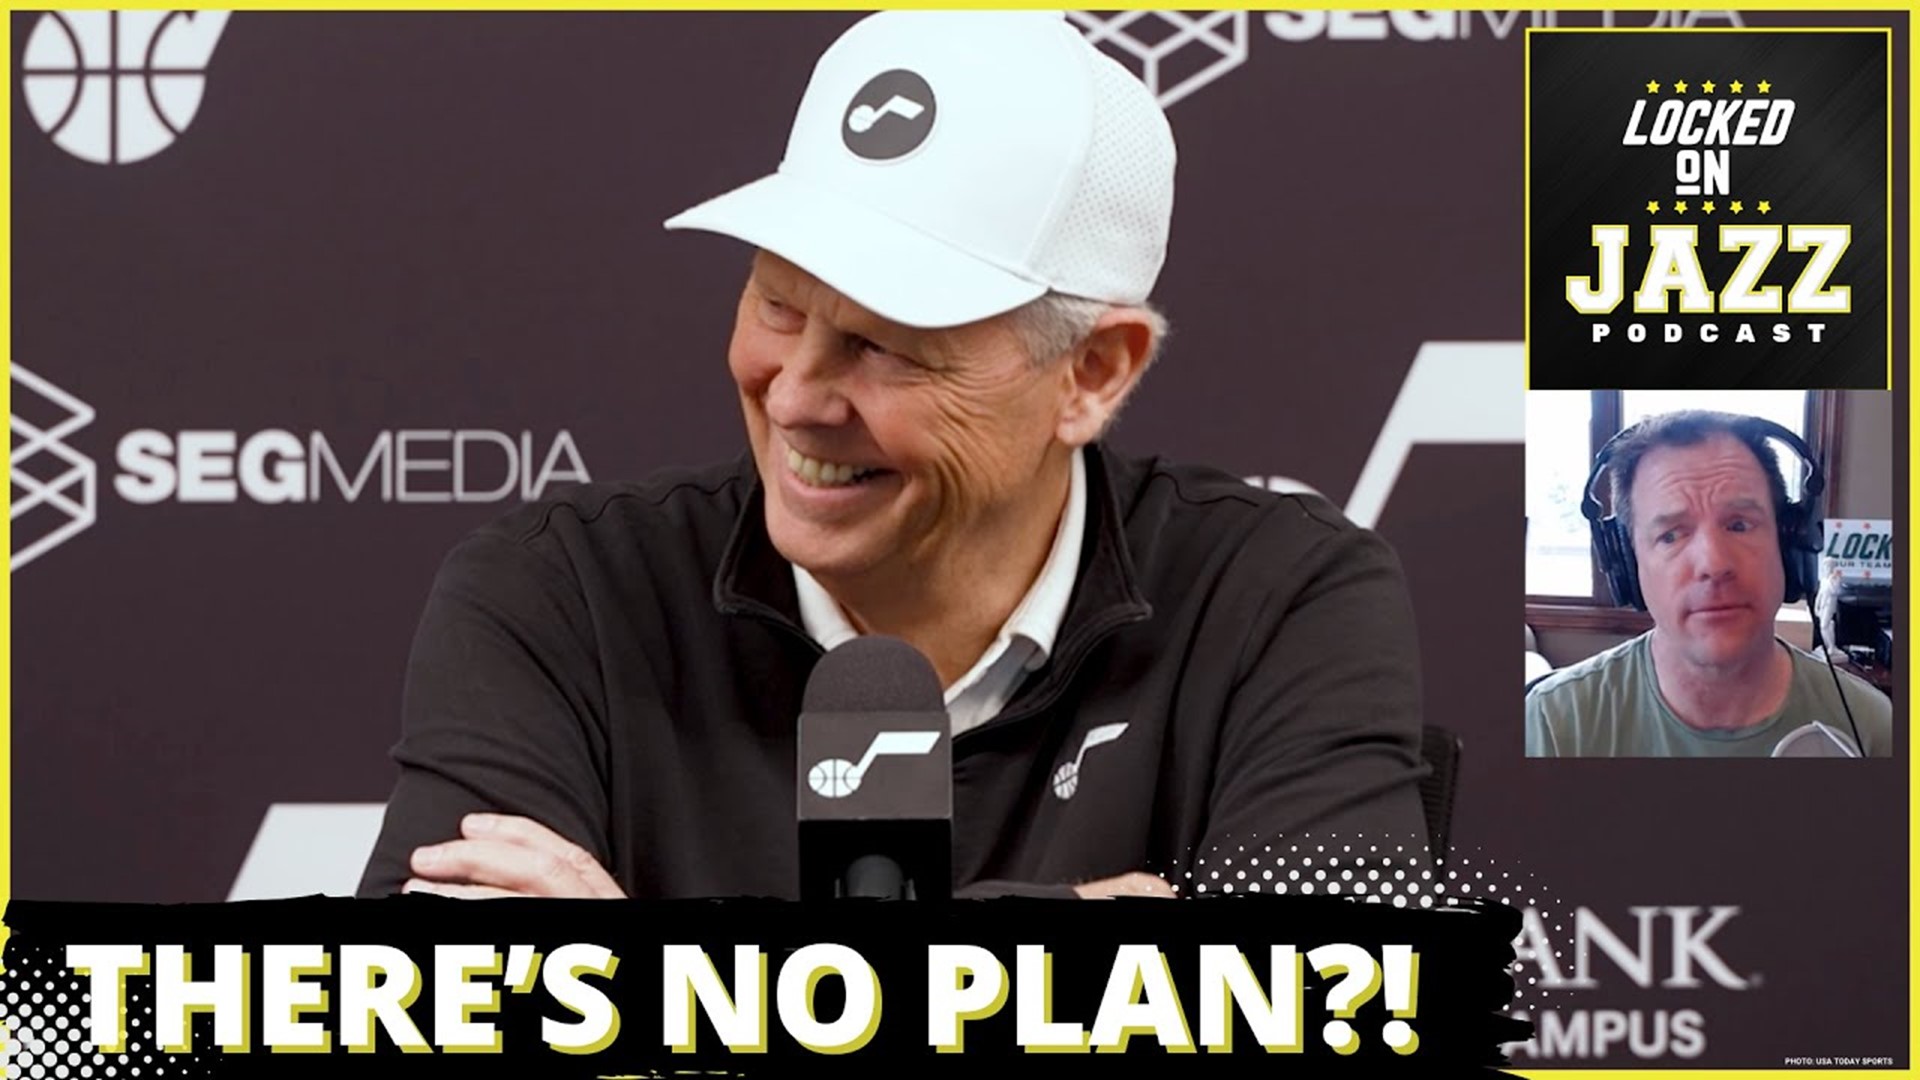 Danny Ainge says there is no plan for the Utah Jazz but is no plan a plan?